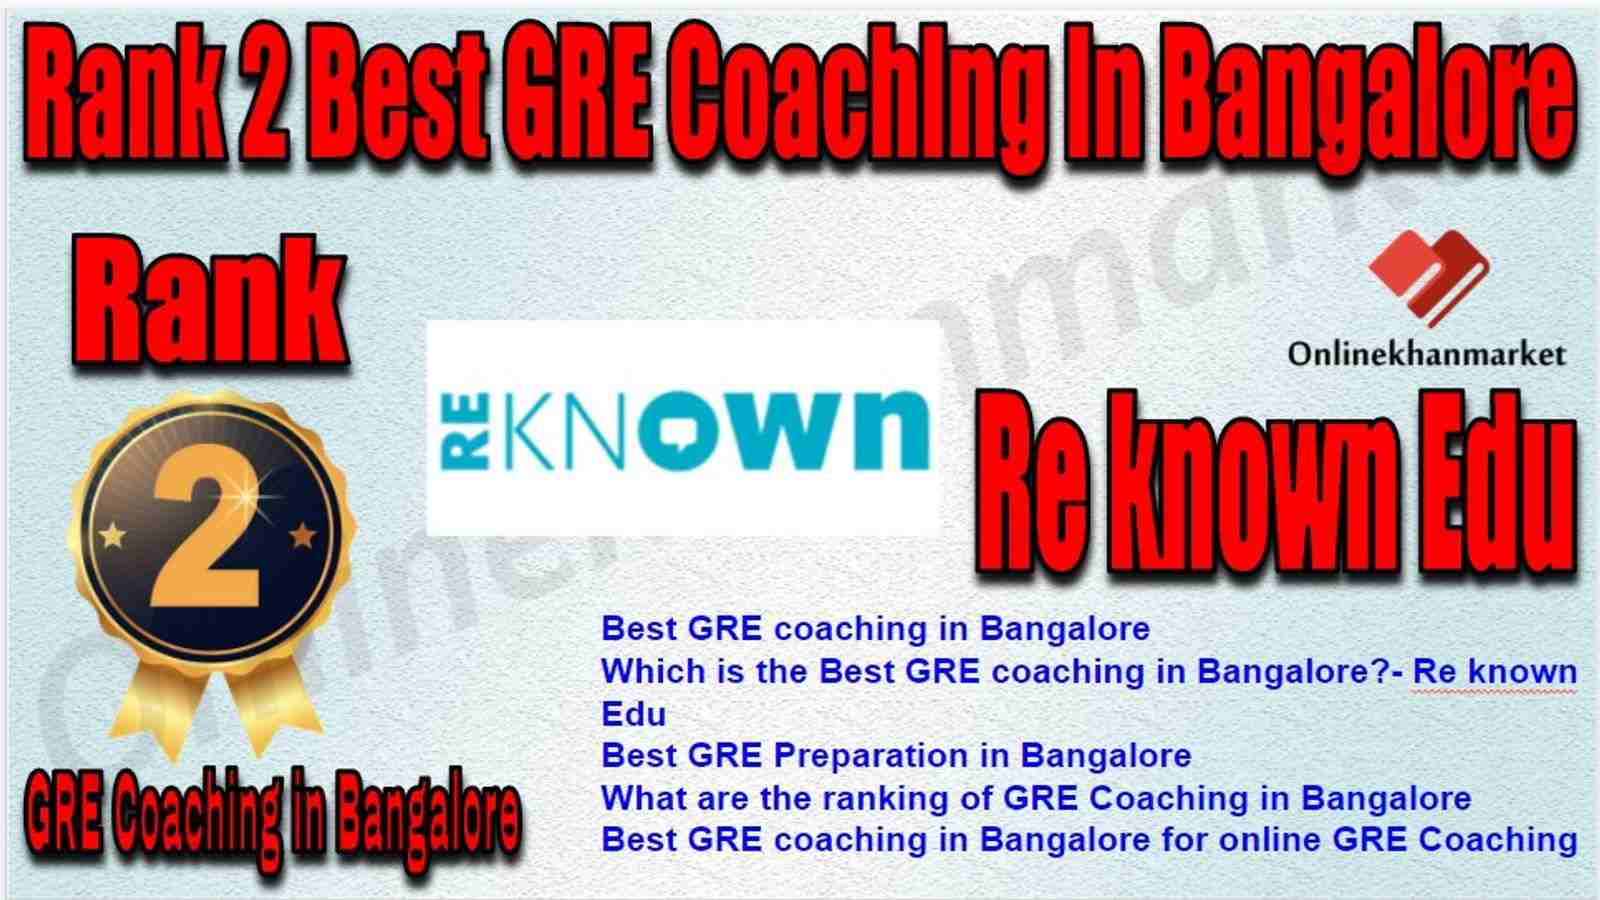 Rank 2 Best GRE Coaching in Bangalore